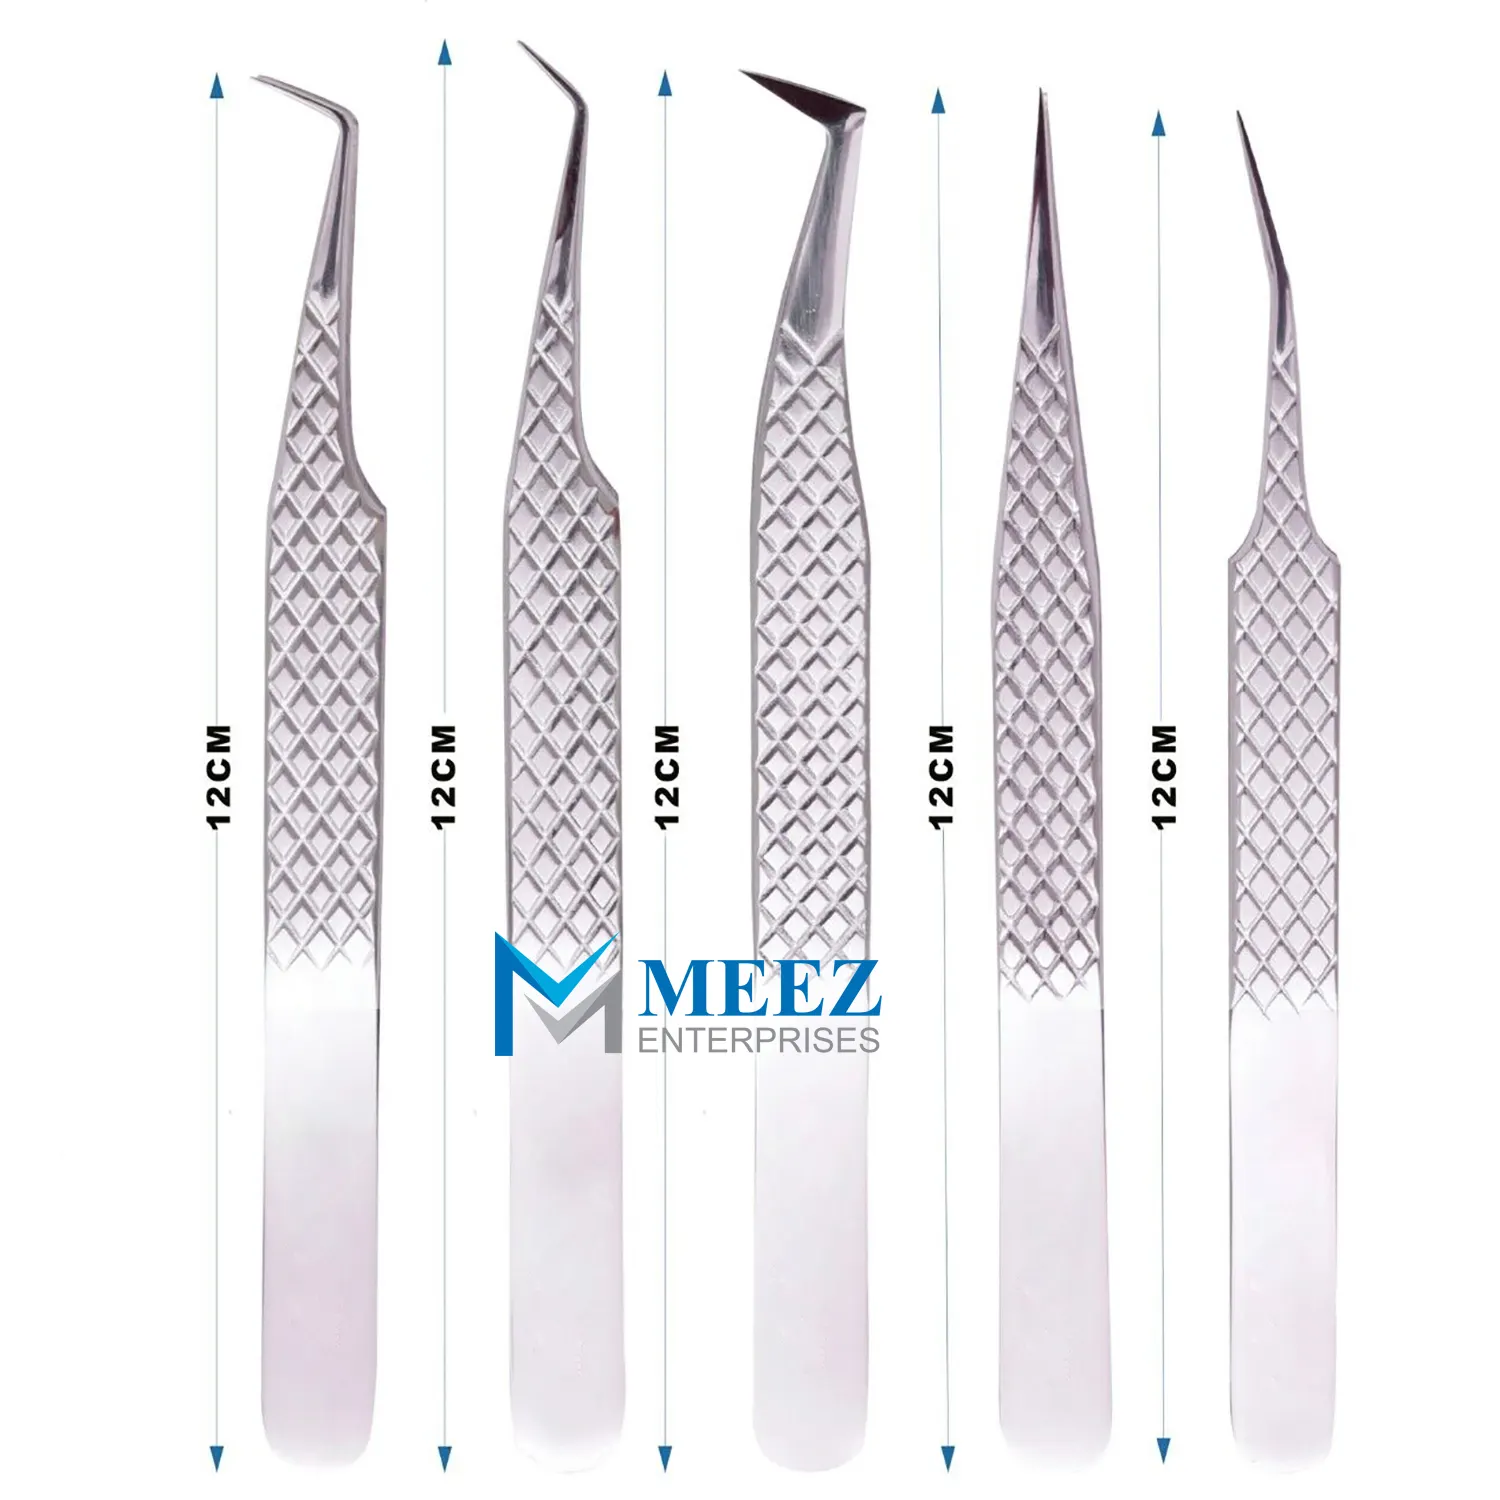 Set of 5 High Quality Stainless Steel Eyelash Extension Tweezers with Diamond Grip and Pointed Tips for Lash Artists